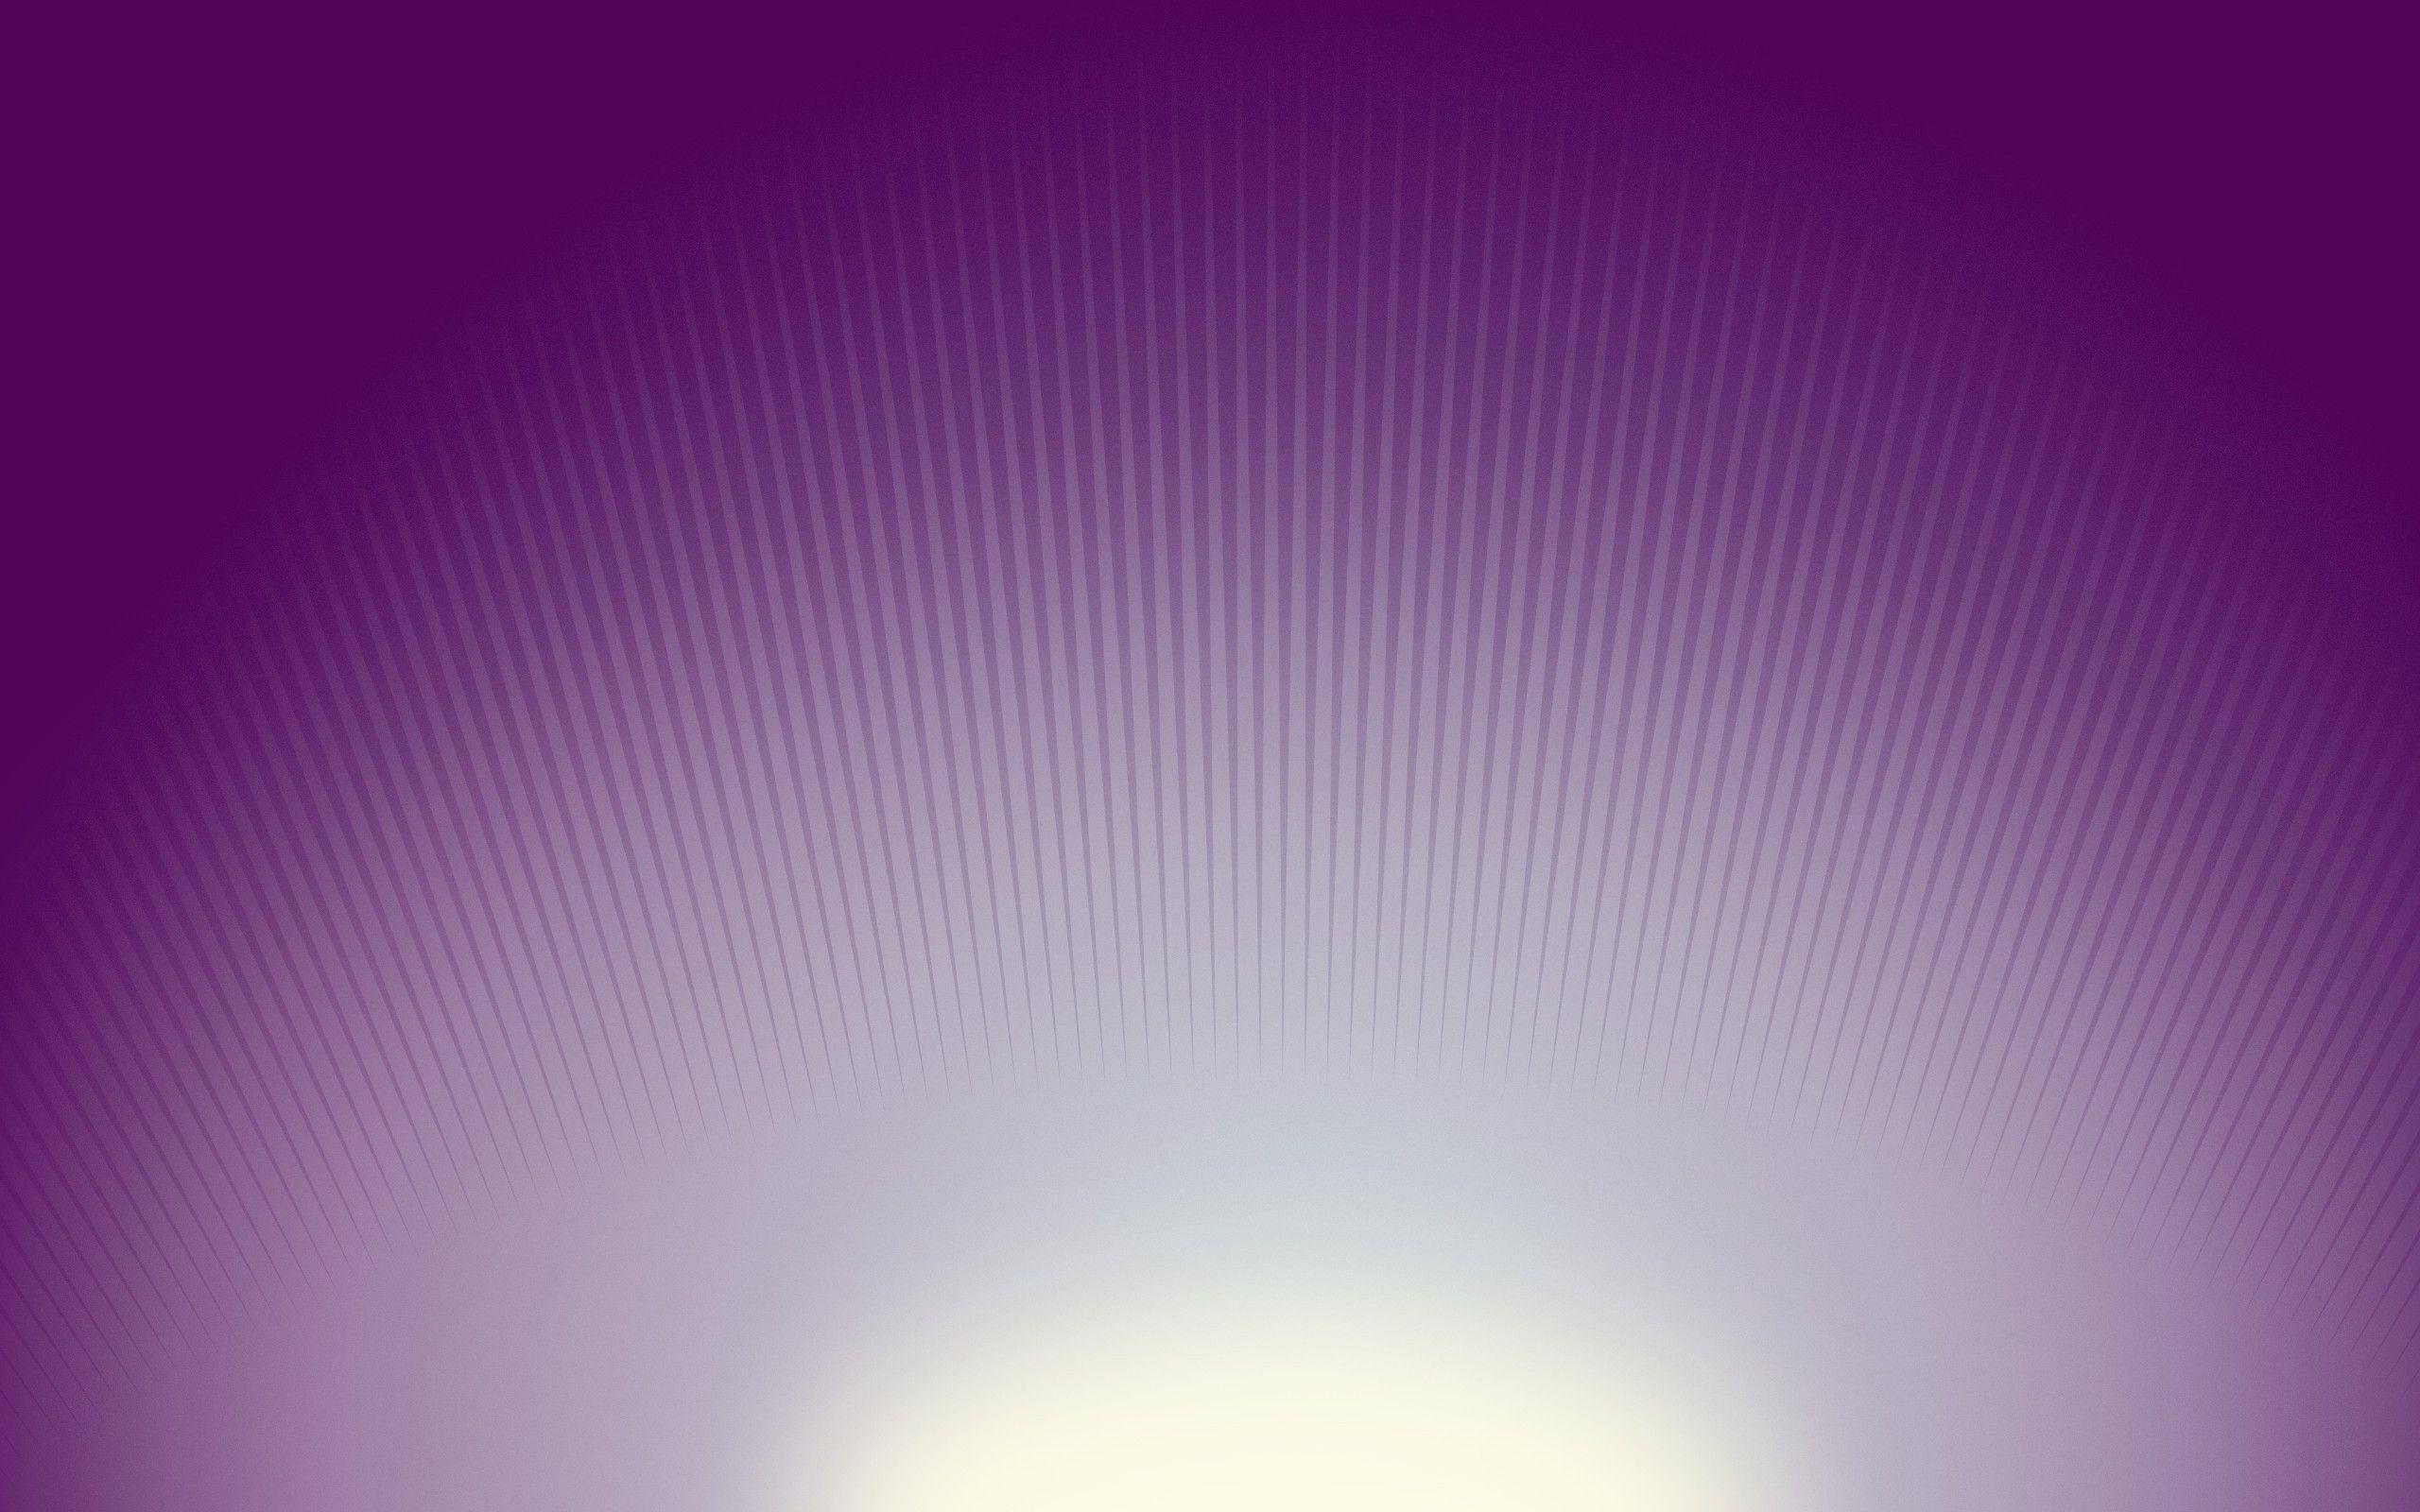 Background Lilac Light Wallpaper 2560x1600 px Free Download